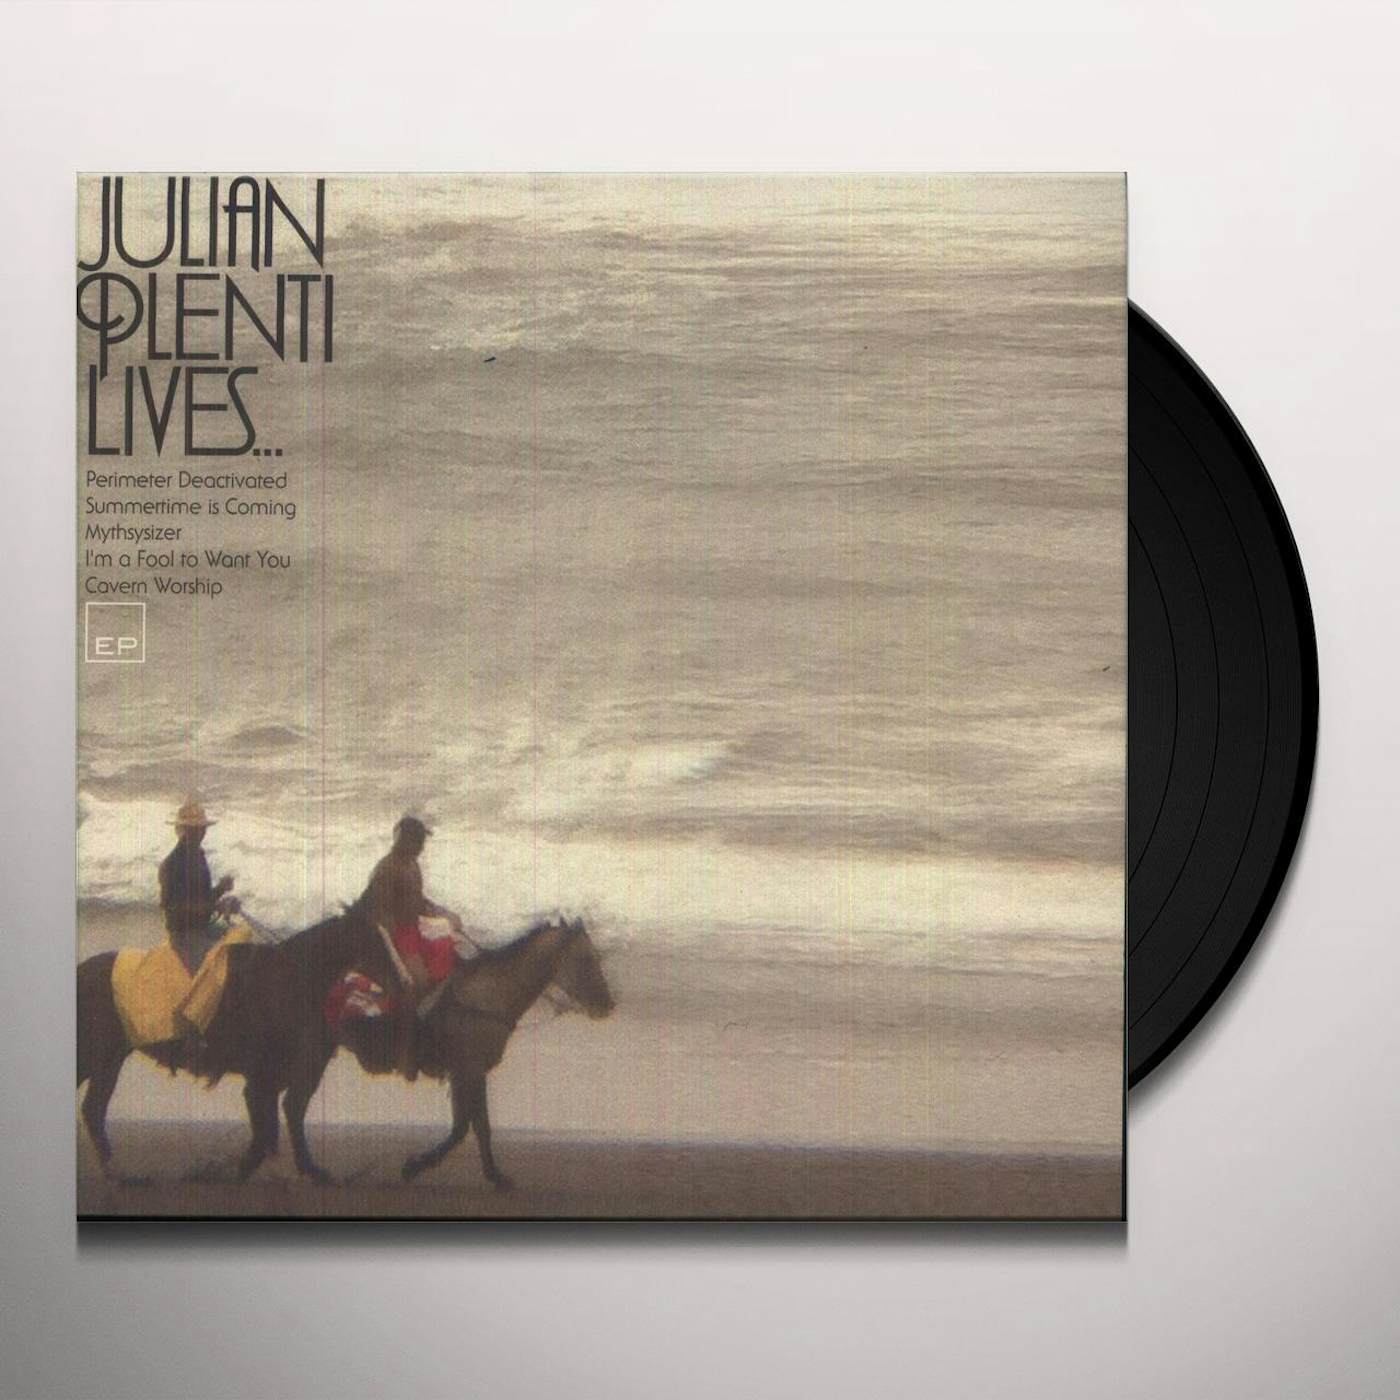 Paul Banks JULIAN PLENTI LIVES   (EP) Vinyl Record - MP3 Download Included, Limited Edition